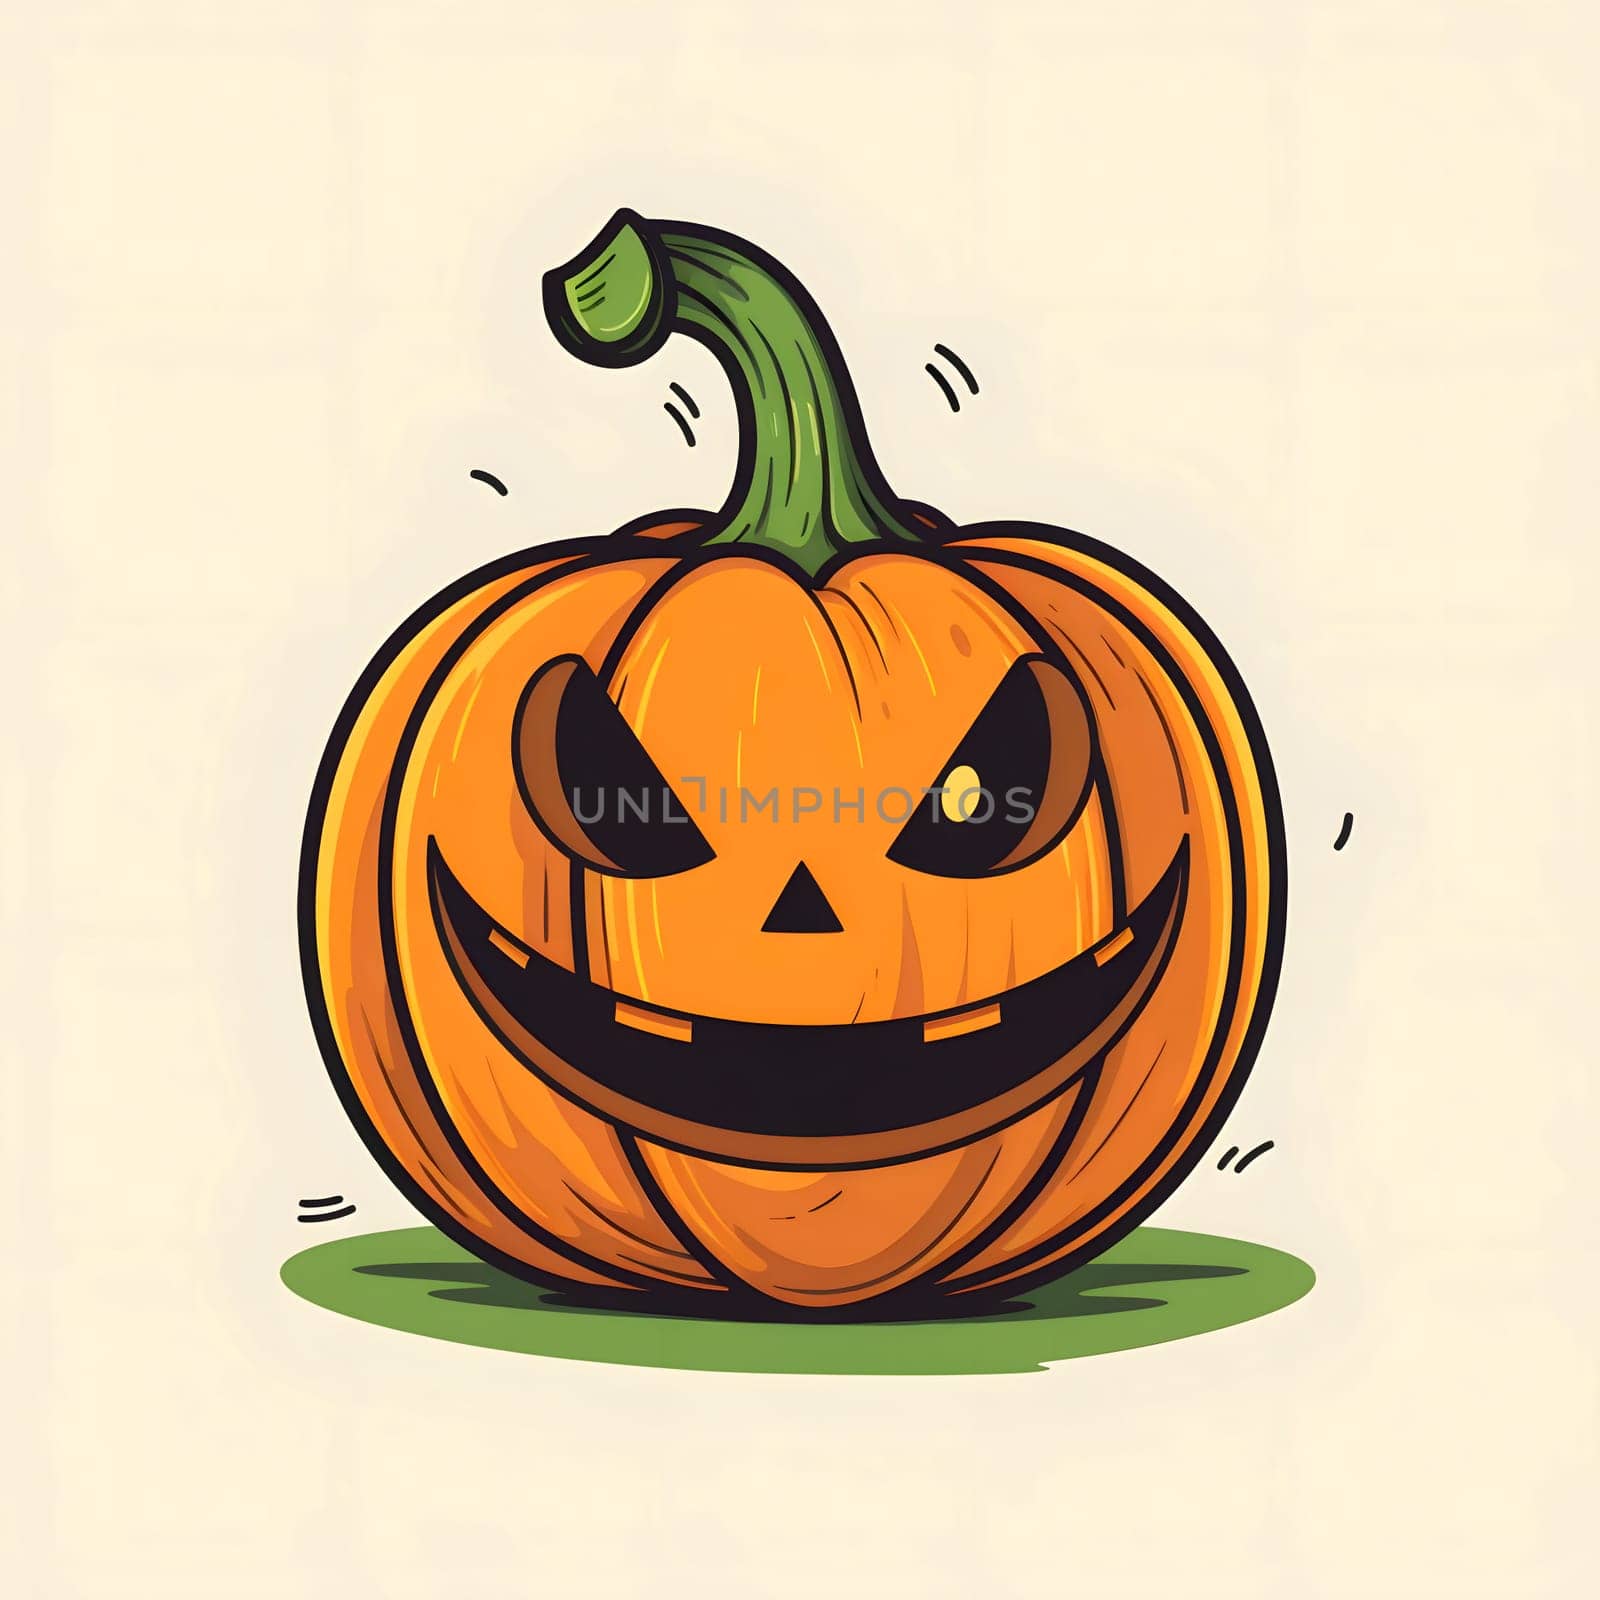 Pumpkin with one eye, Halloween image on a bright isolated background. Atmosphere of darkness and fear.